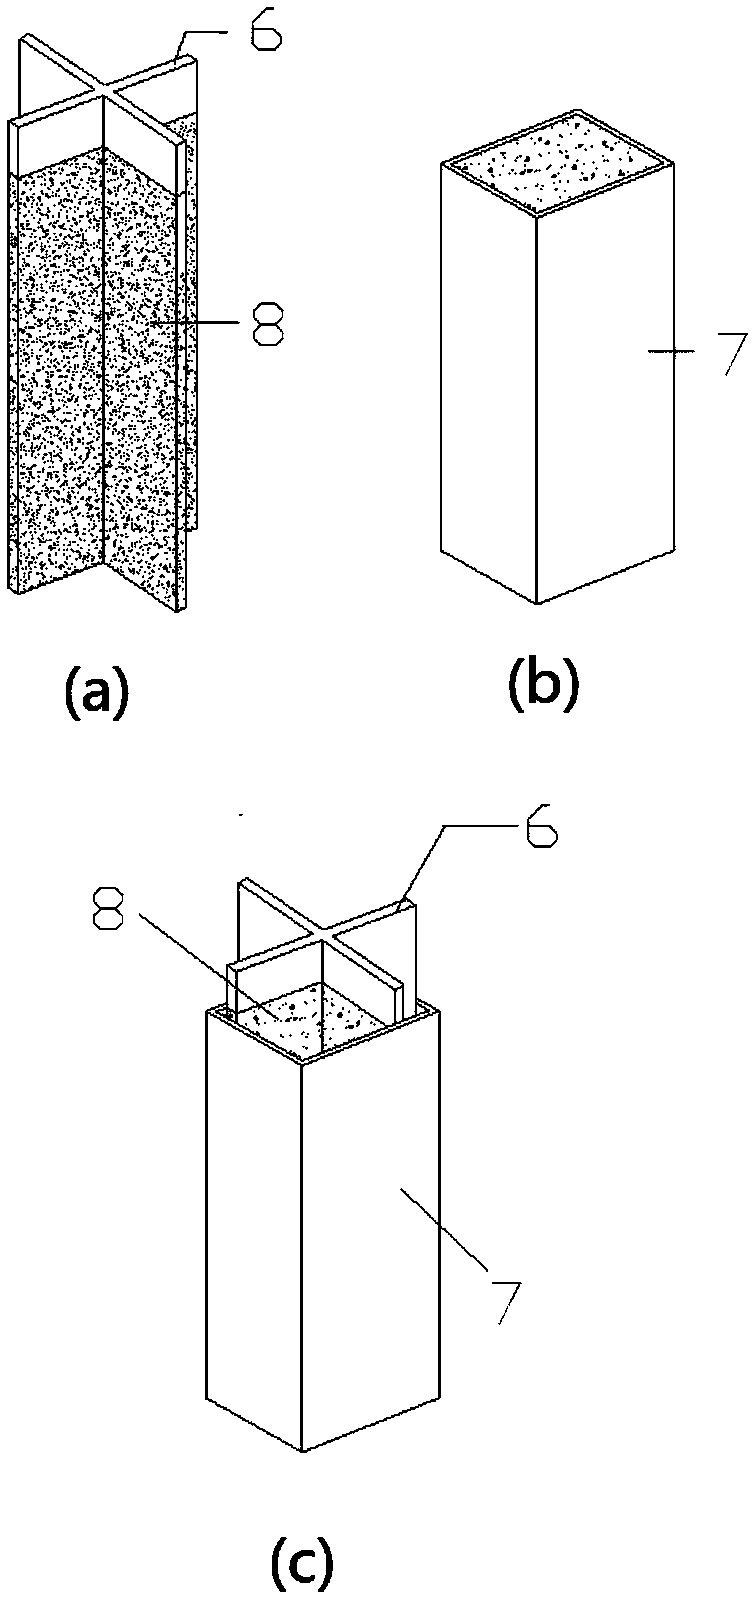 Frame structure system used in high-intensity area